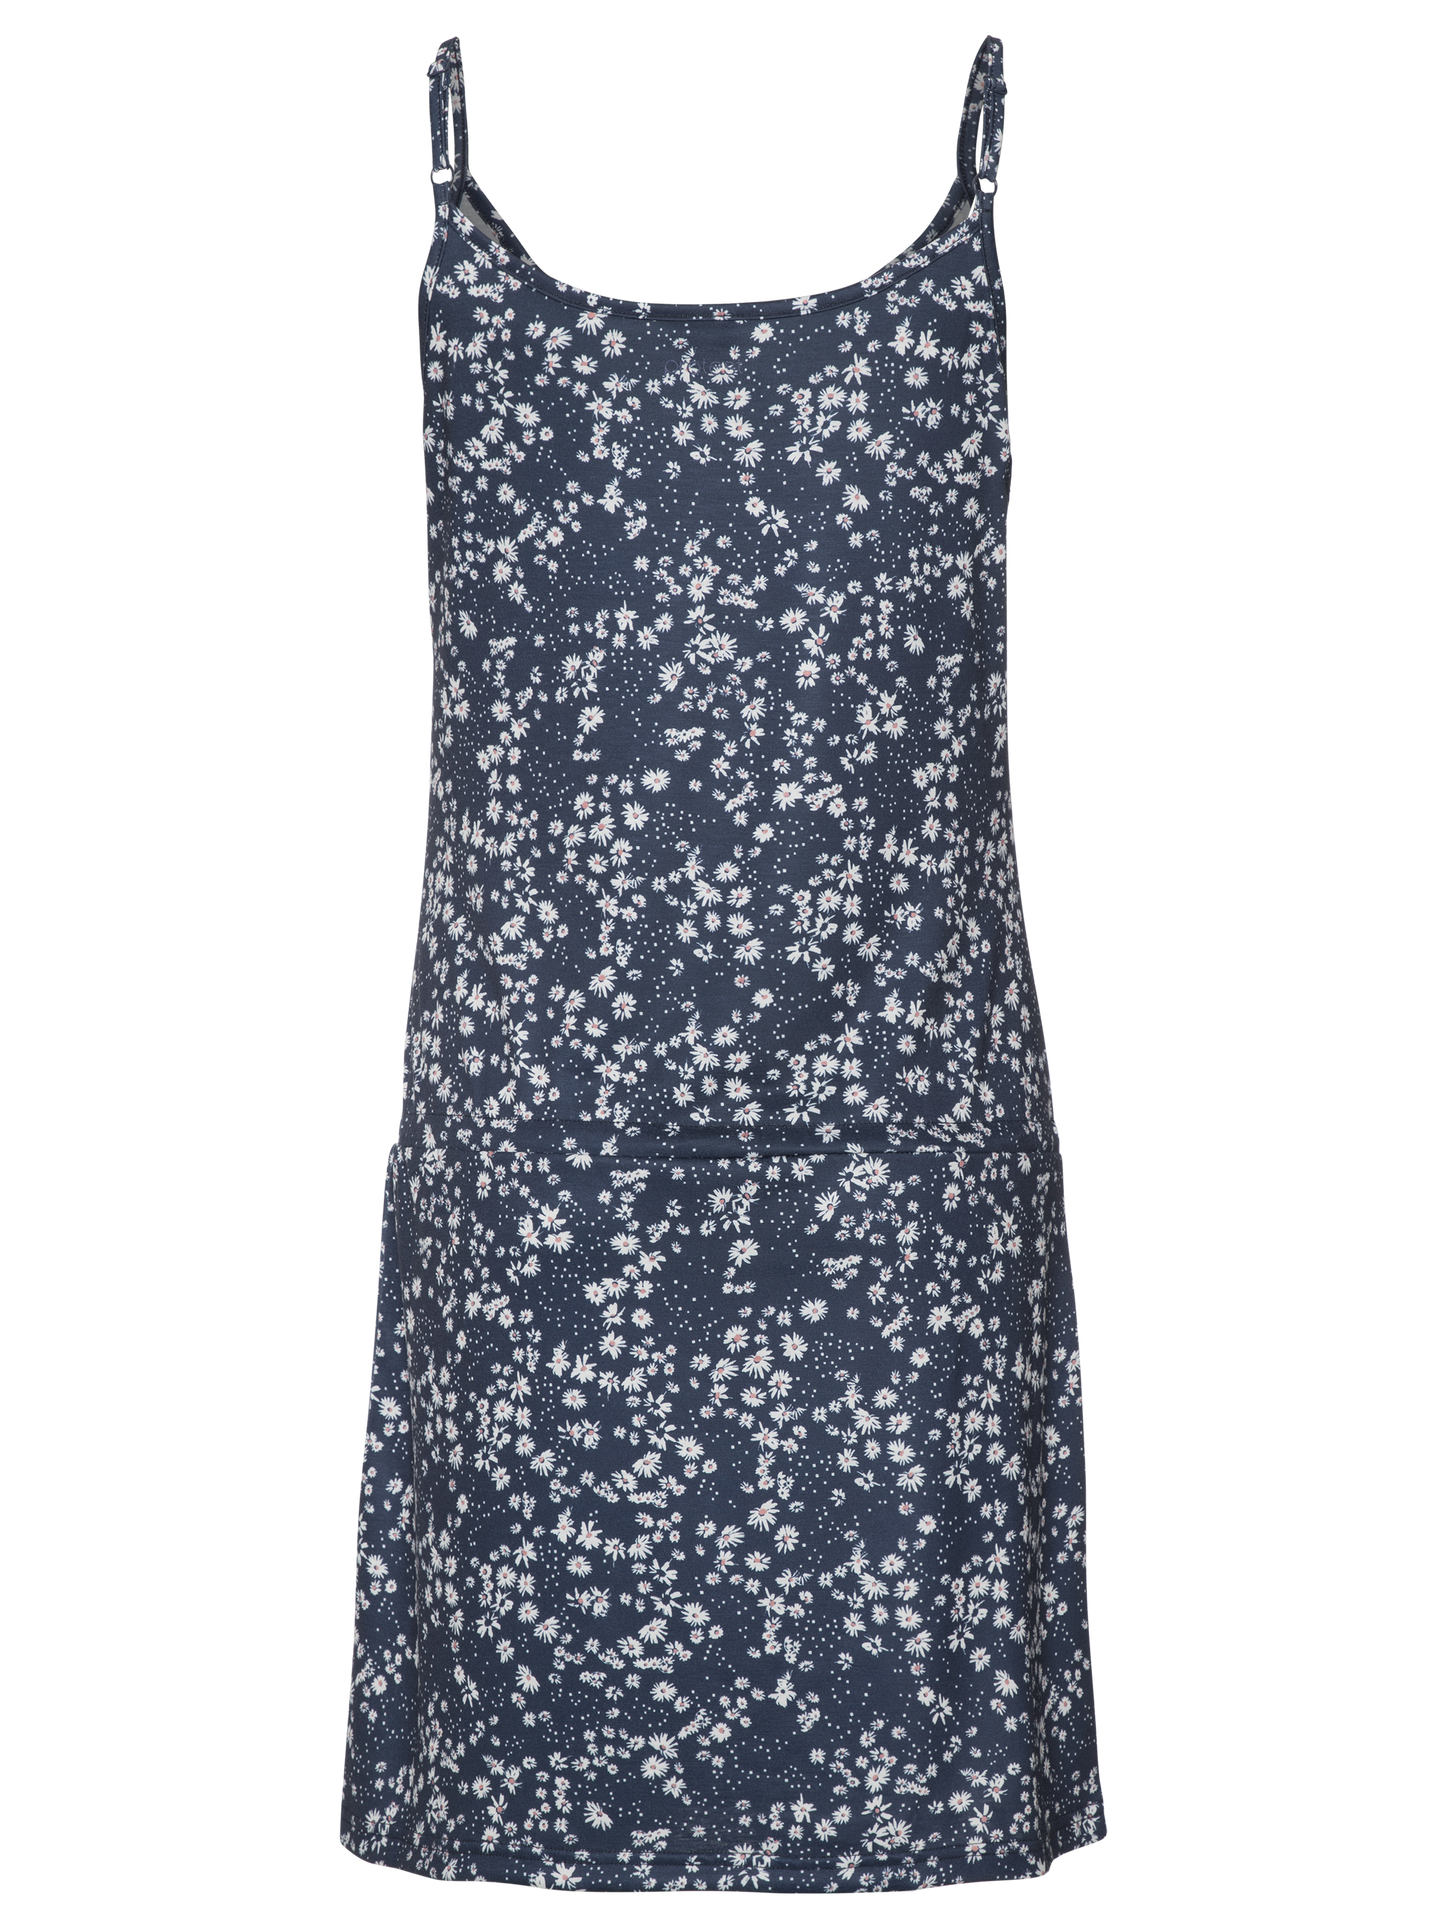 Protest Bountier Floral Dress in Navy Floral